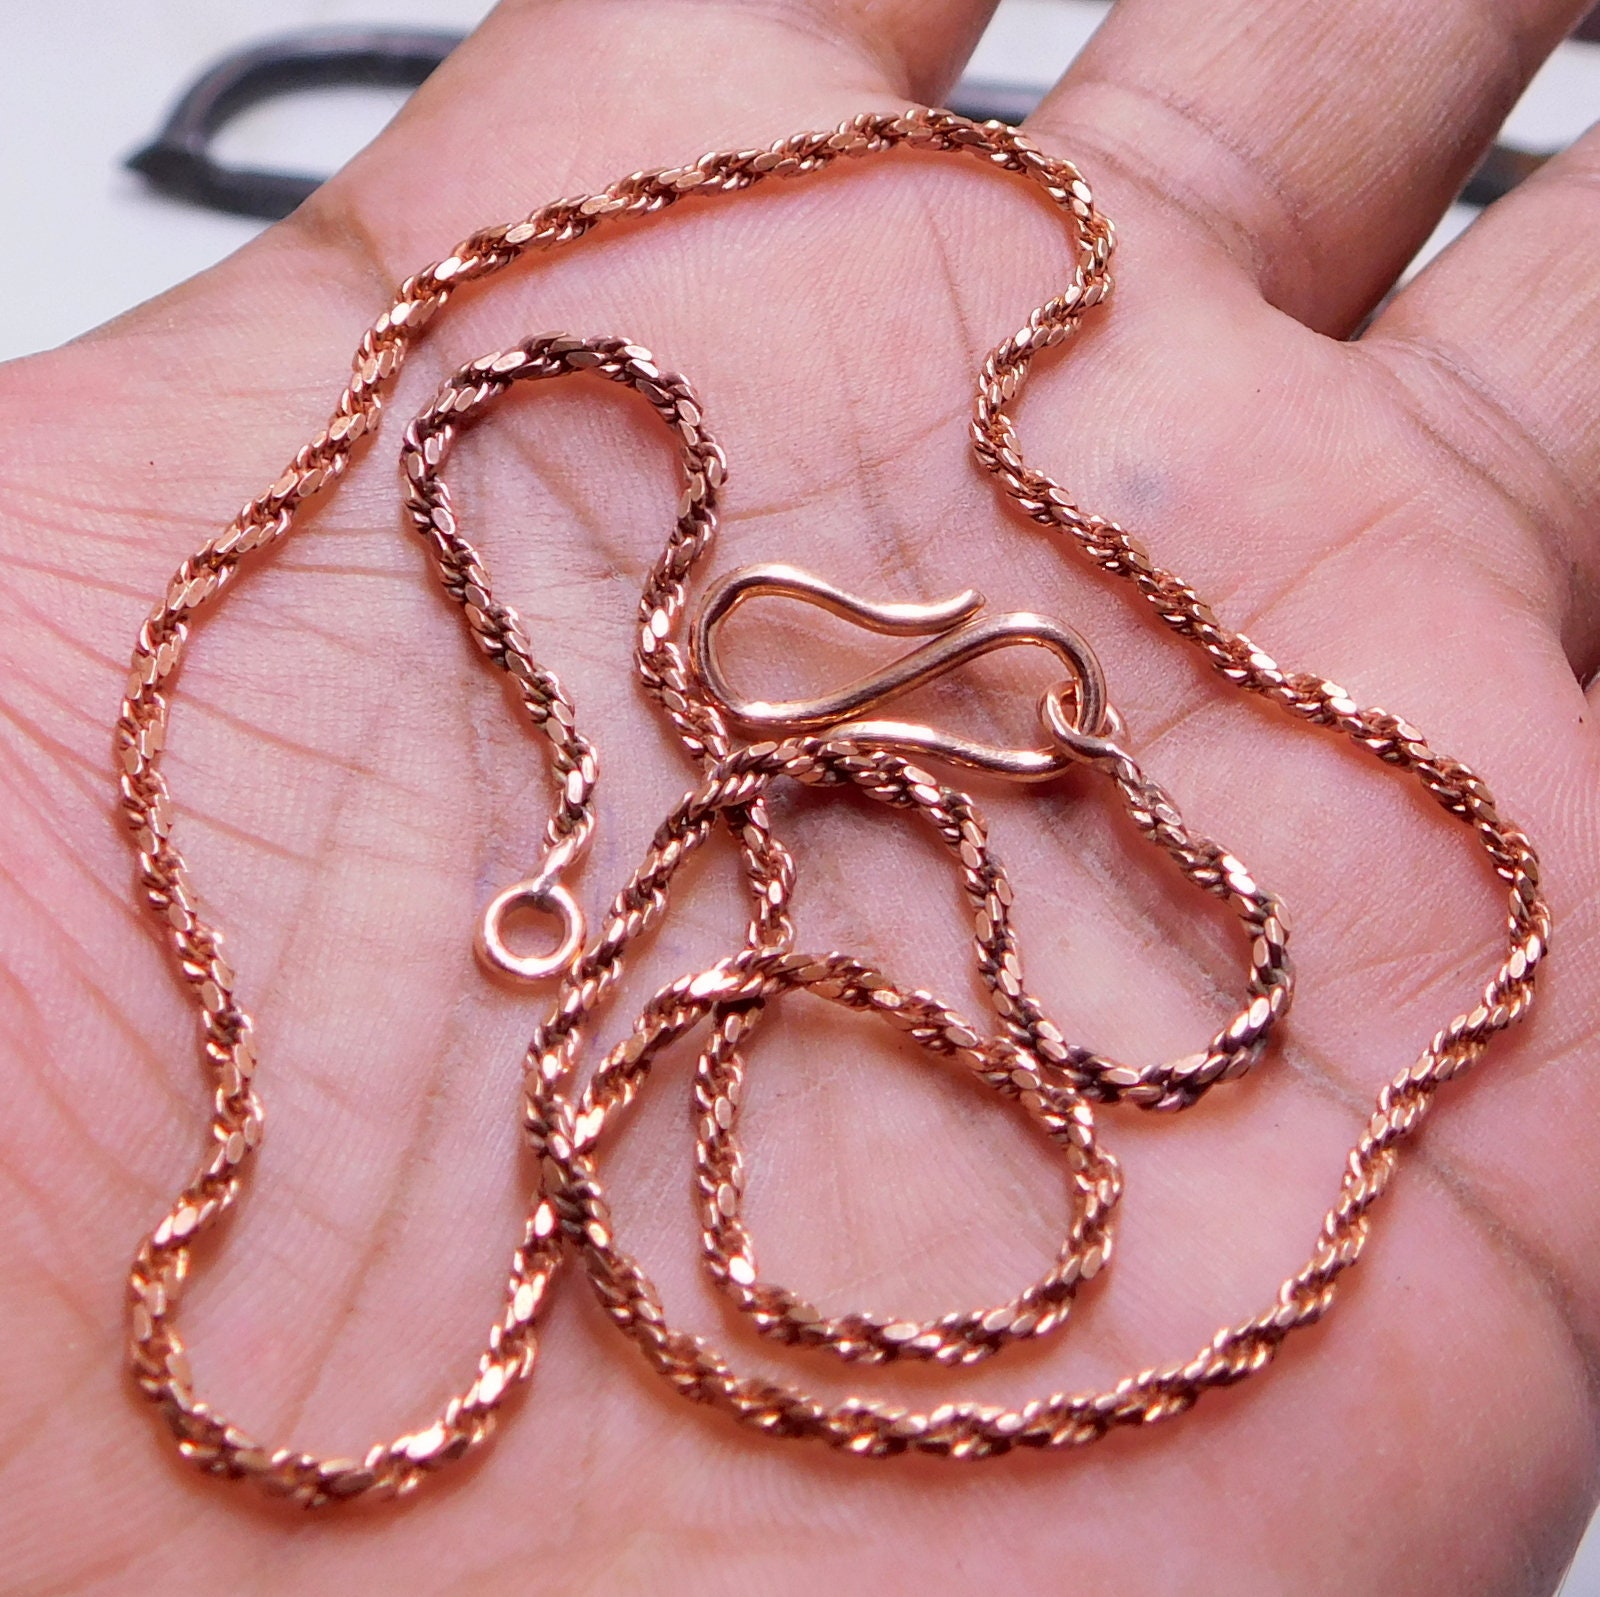 Kumihimo Necklace Kit - Rose Gold and Antique Copper Chain